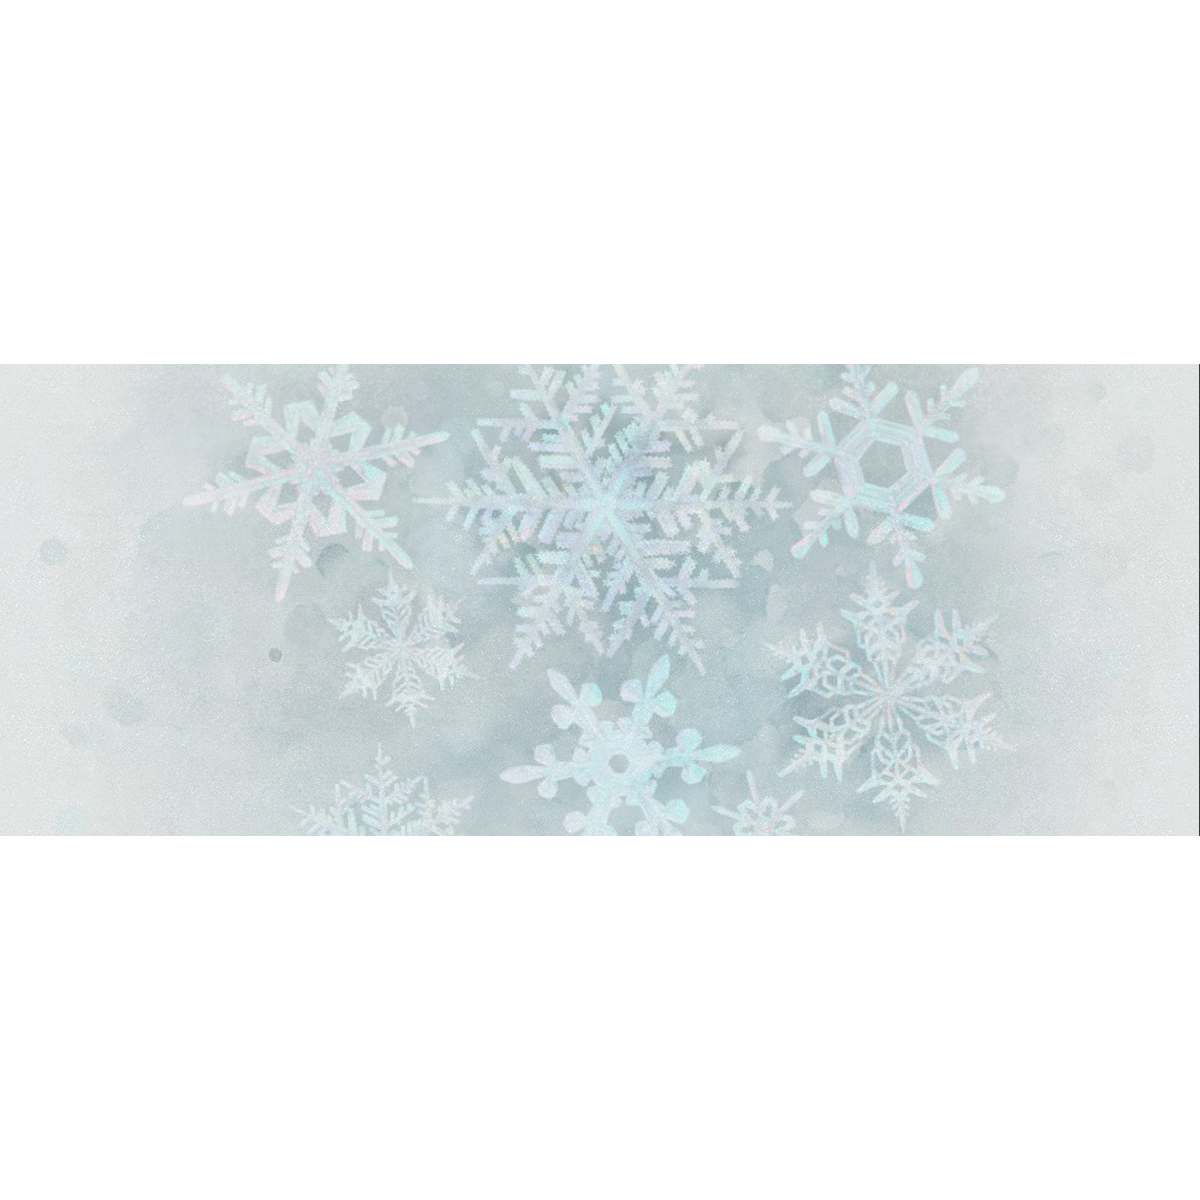 Snowflakes White and blue, Christmas Gift Wrapping Paper 58"x 23" (5 Rolls)